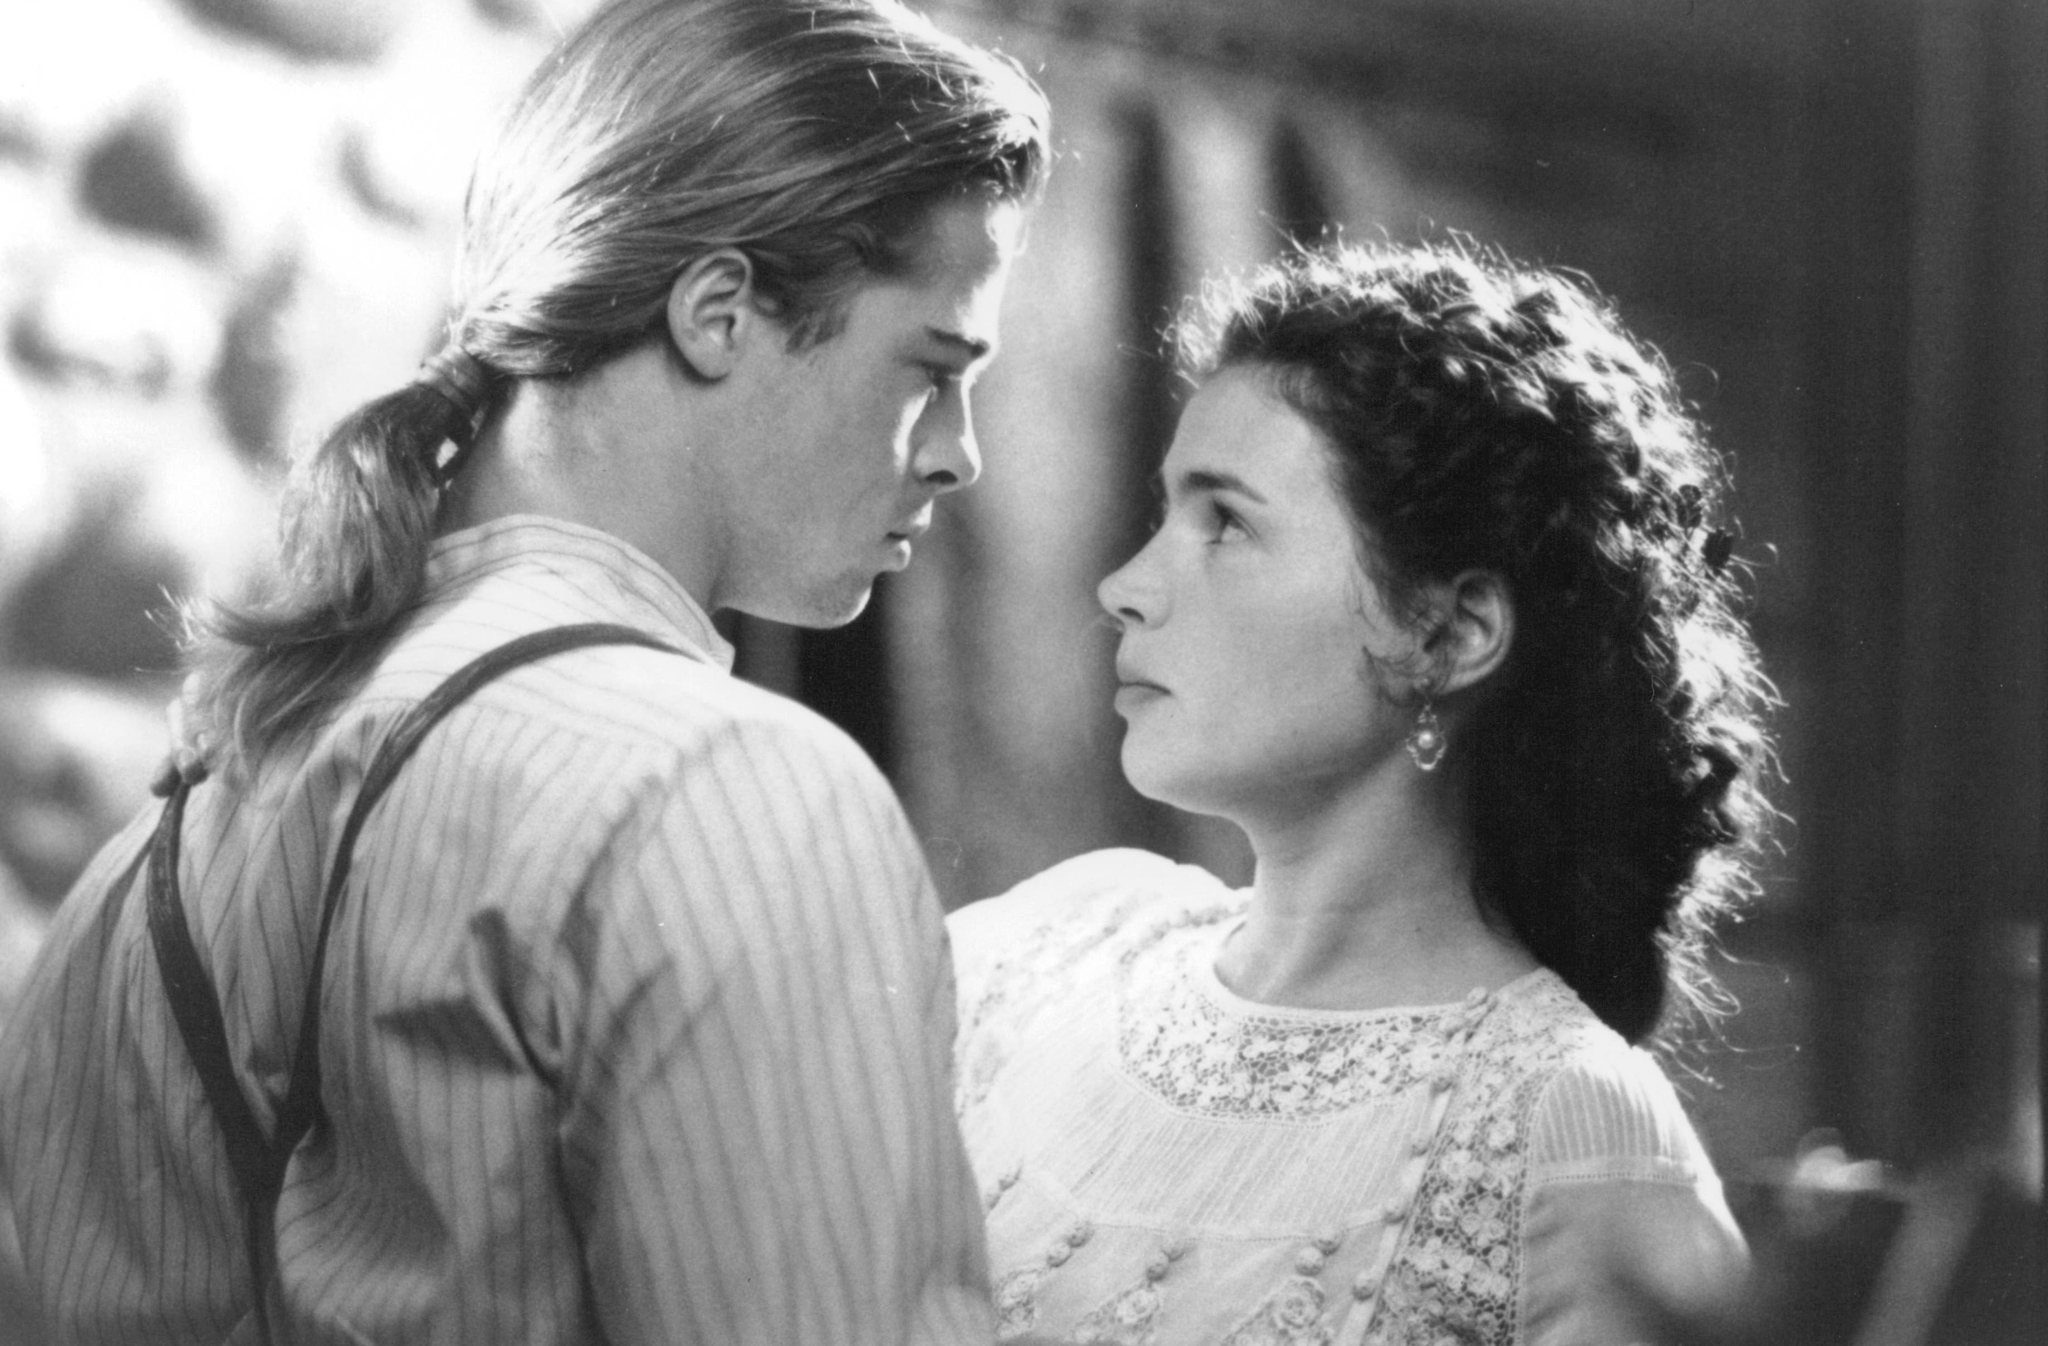 Still of Brad Pitt and Julia Ormond in Legends of the Fall (1994)